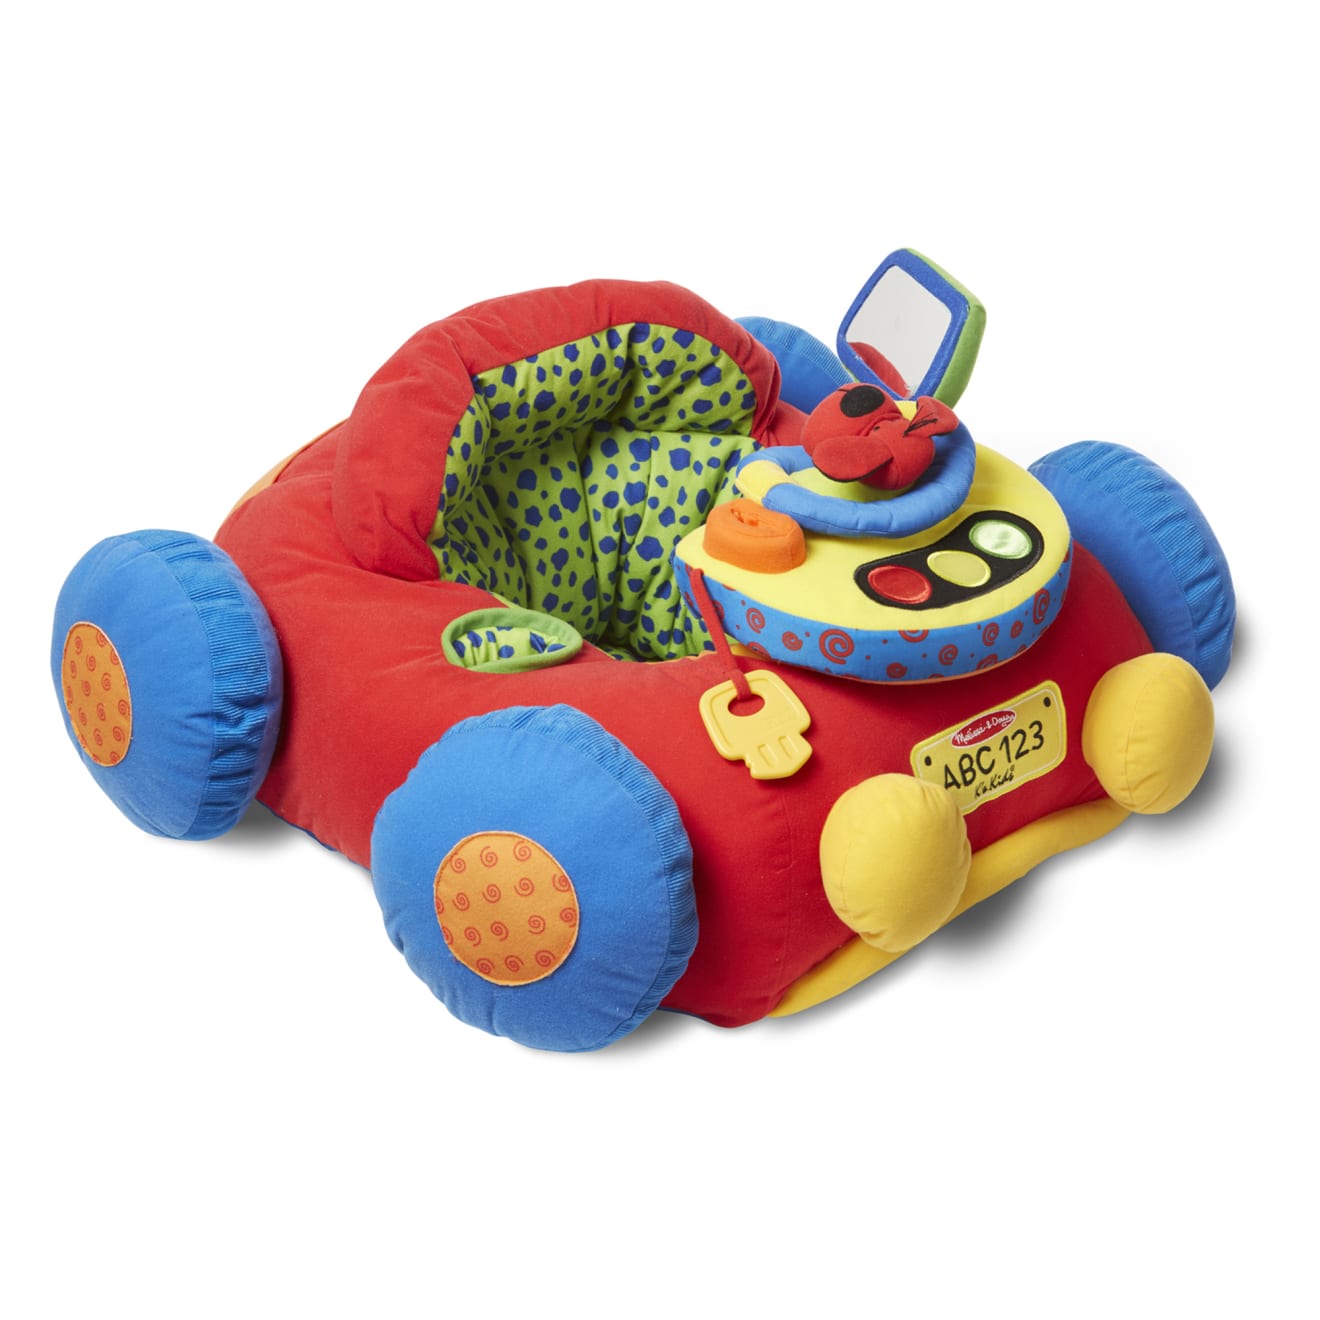 Fisher Price Brand baby learning toys Play & Learn Activity Cube